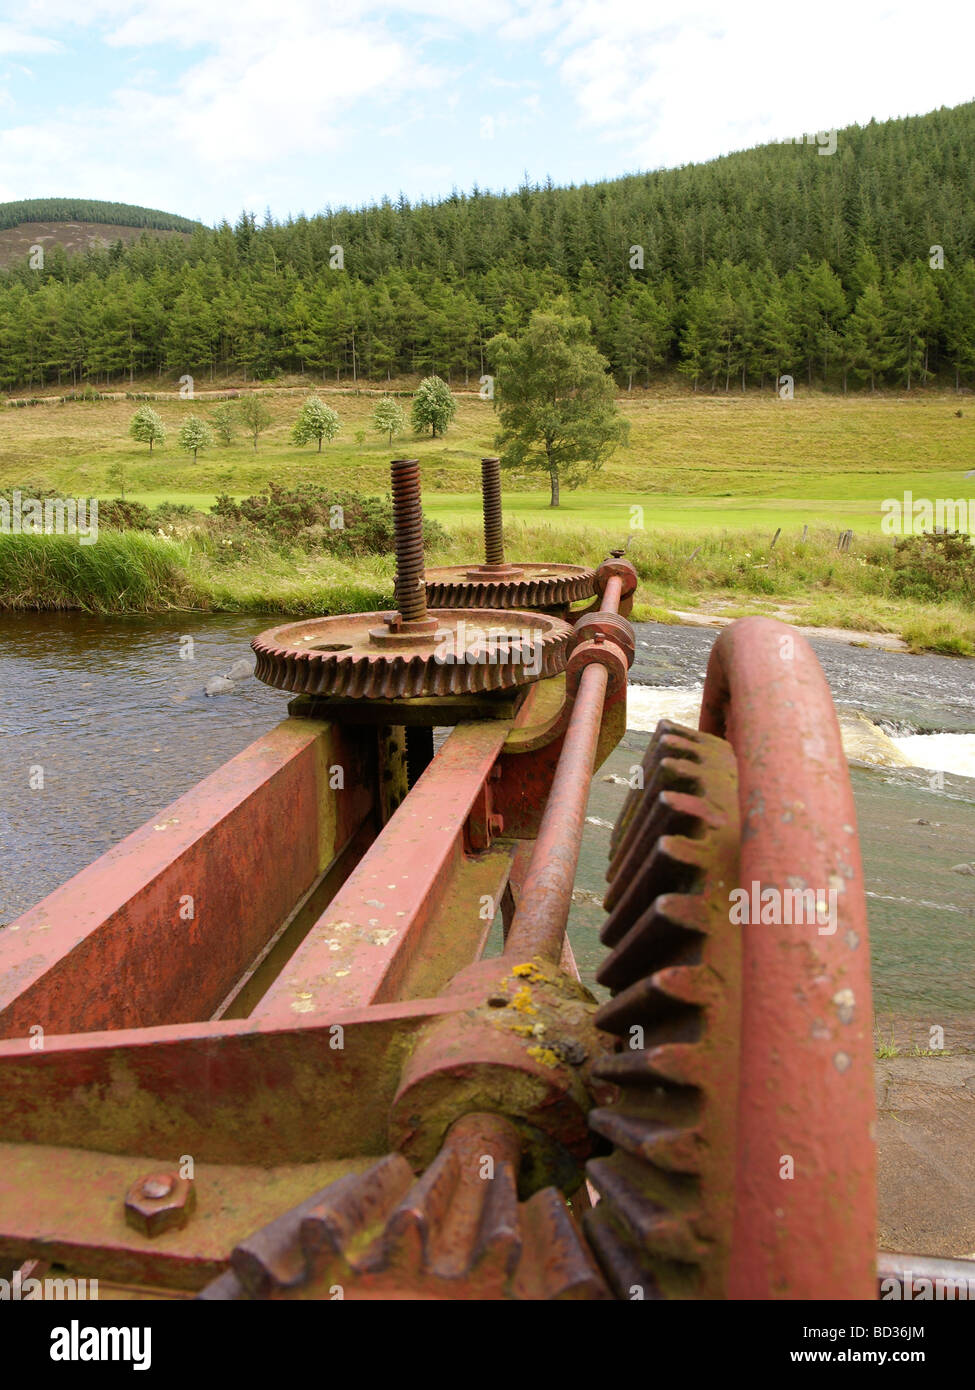 Gears for opening the sluice gates at the dam on the Leithen Water above Innerleithen, Borders Region Scotland Stock Photo